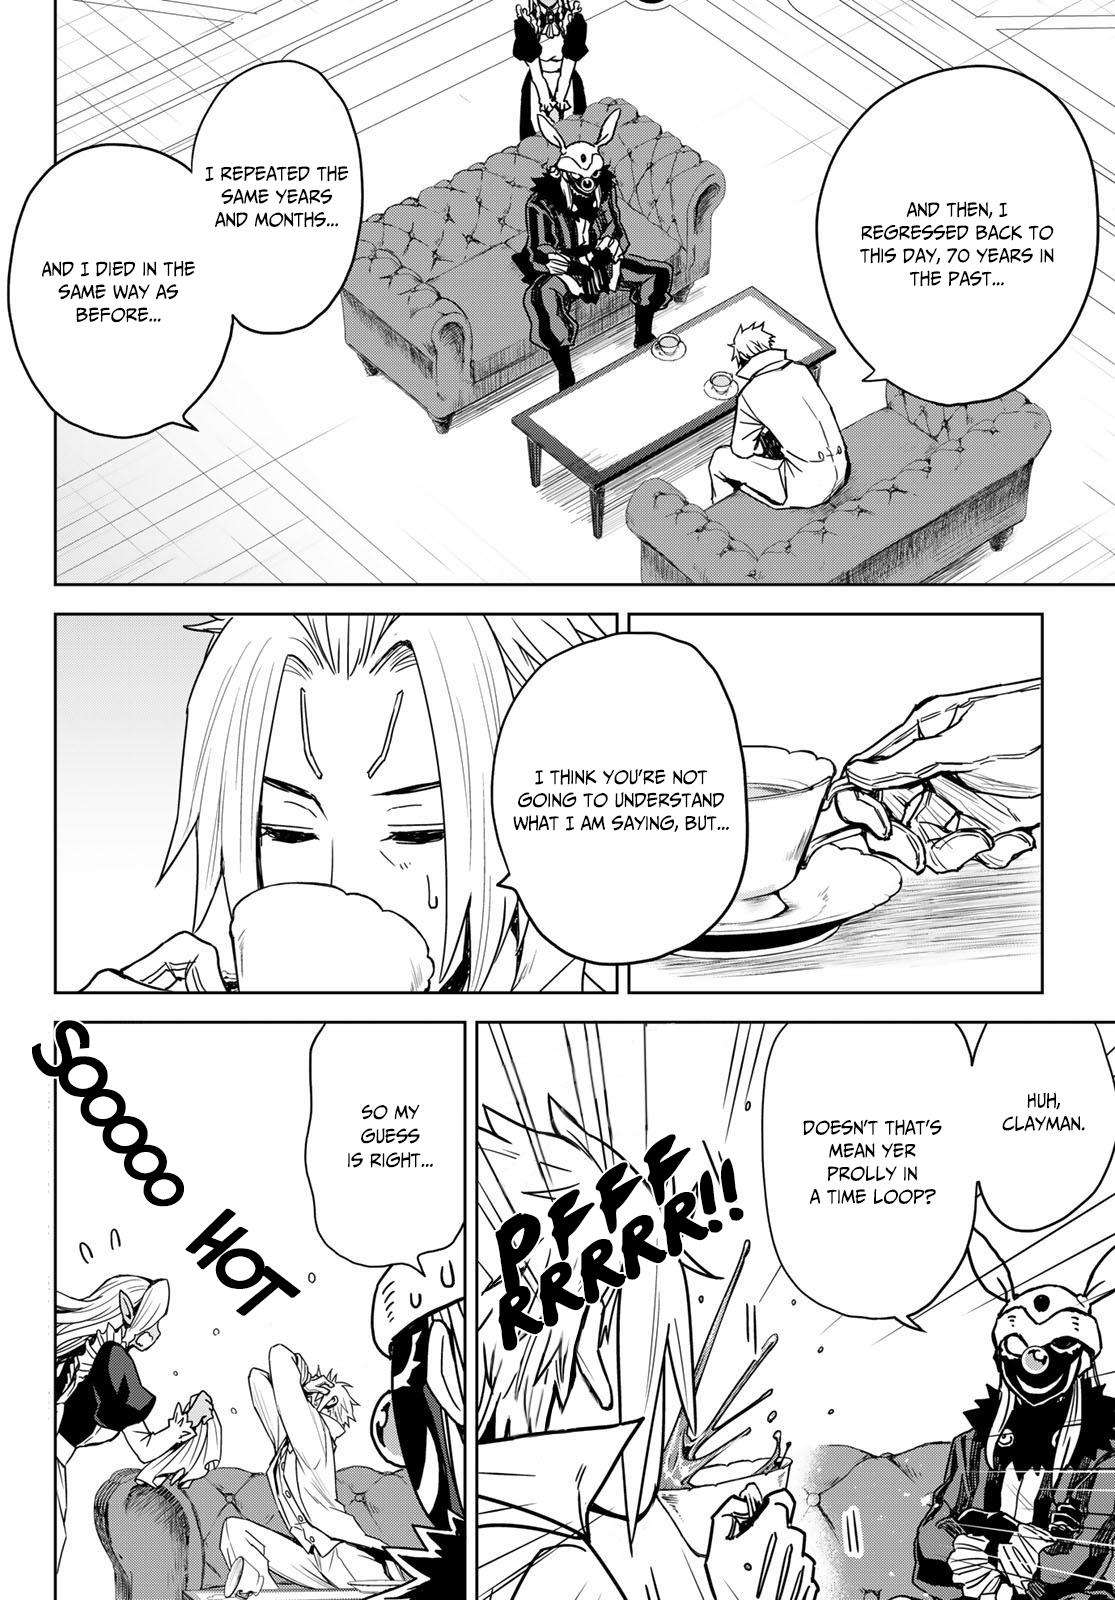 That Time I Got Reincarnated as a Slime - Clayman - chapter 2 - #6